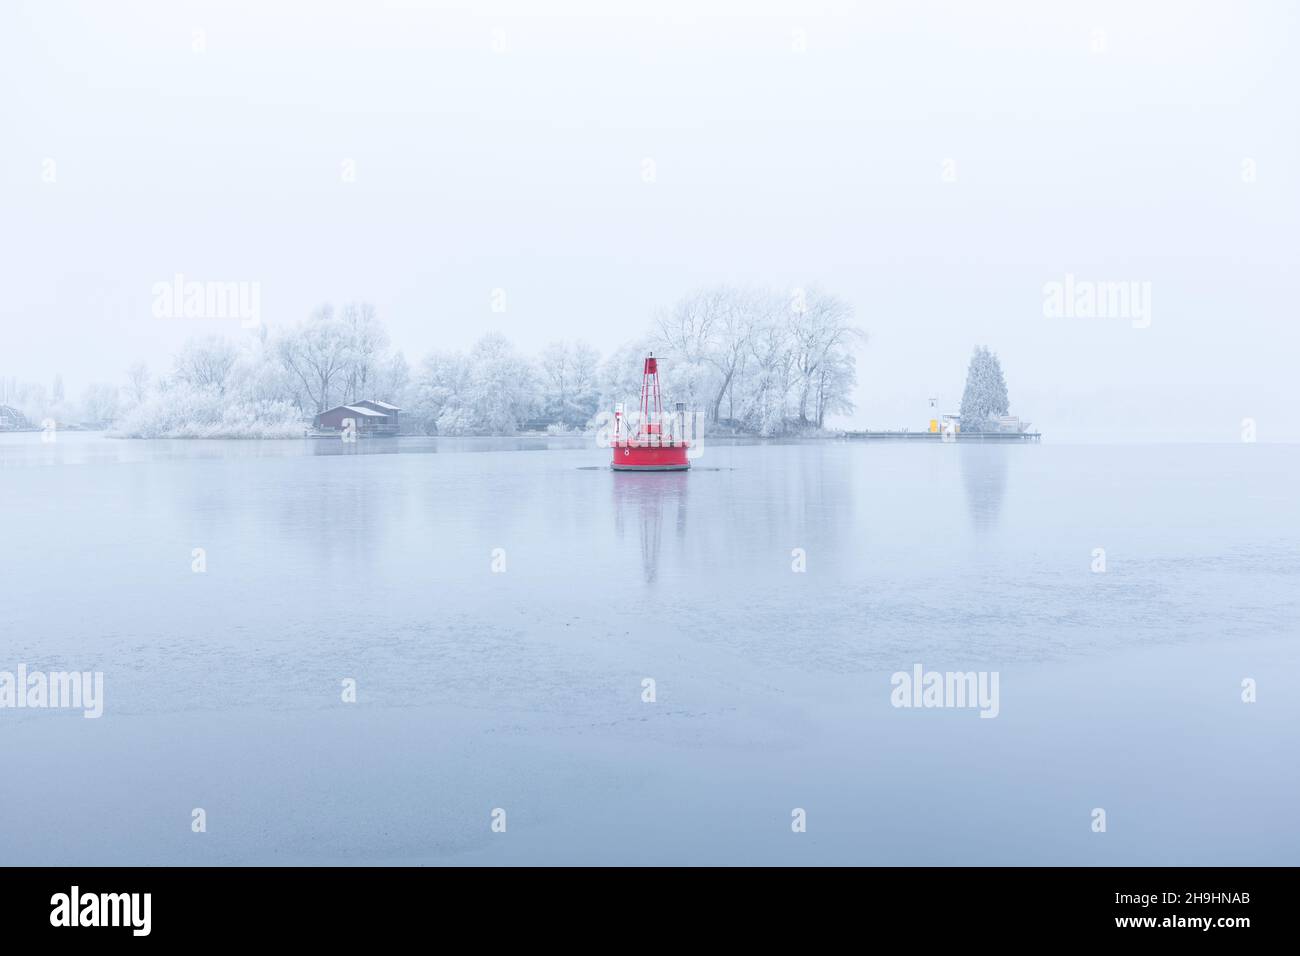 A big red buoy in the frozen water of the citylake 'the Nieuwe Meer lake in Amsterdam. Reflection in the ice and water and frozen harbour trees and fo Stock Photo